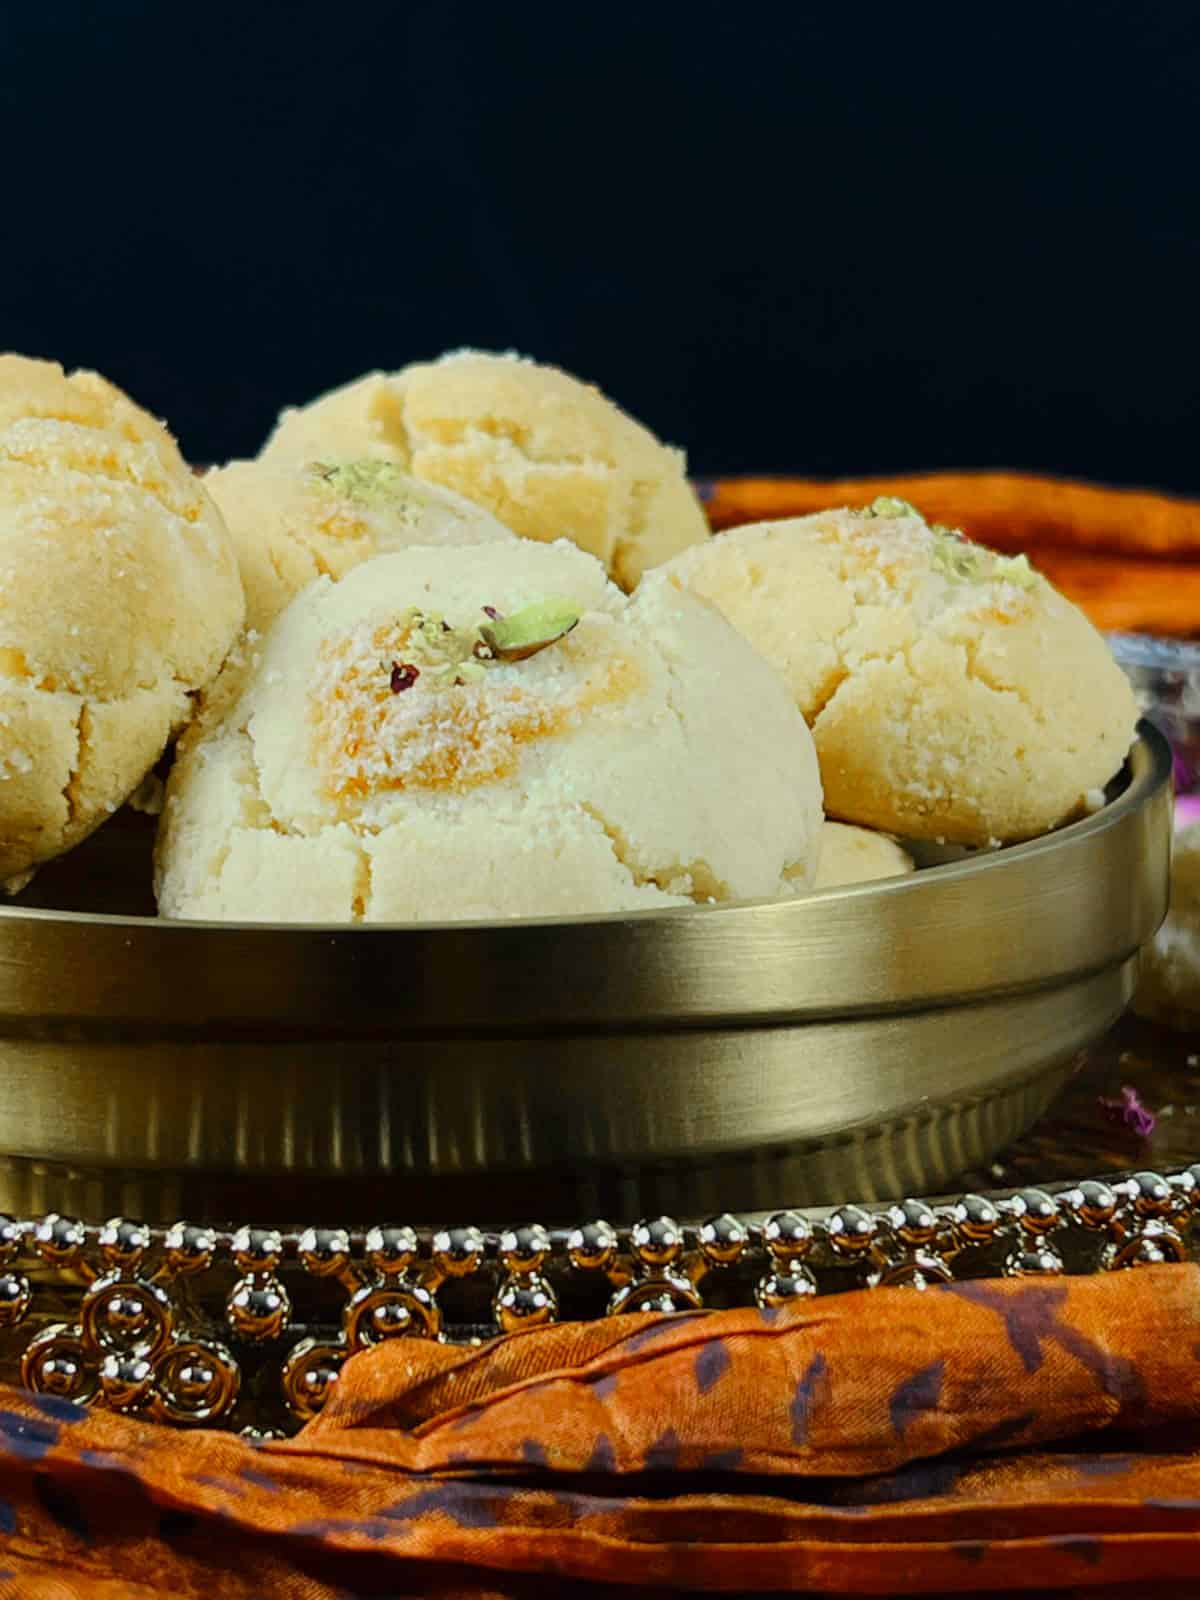 Nankhatai served in a traditional brass bowl.